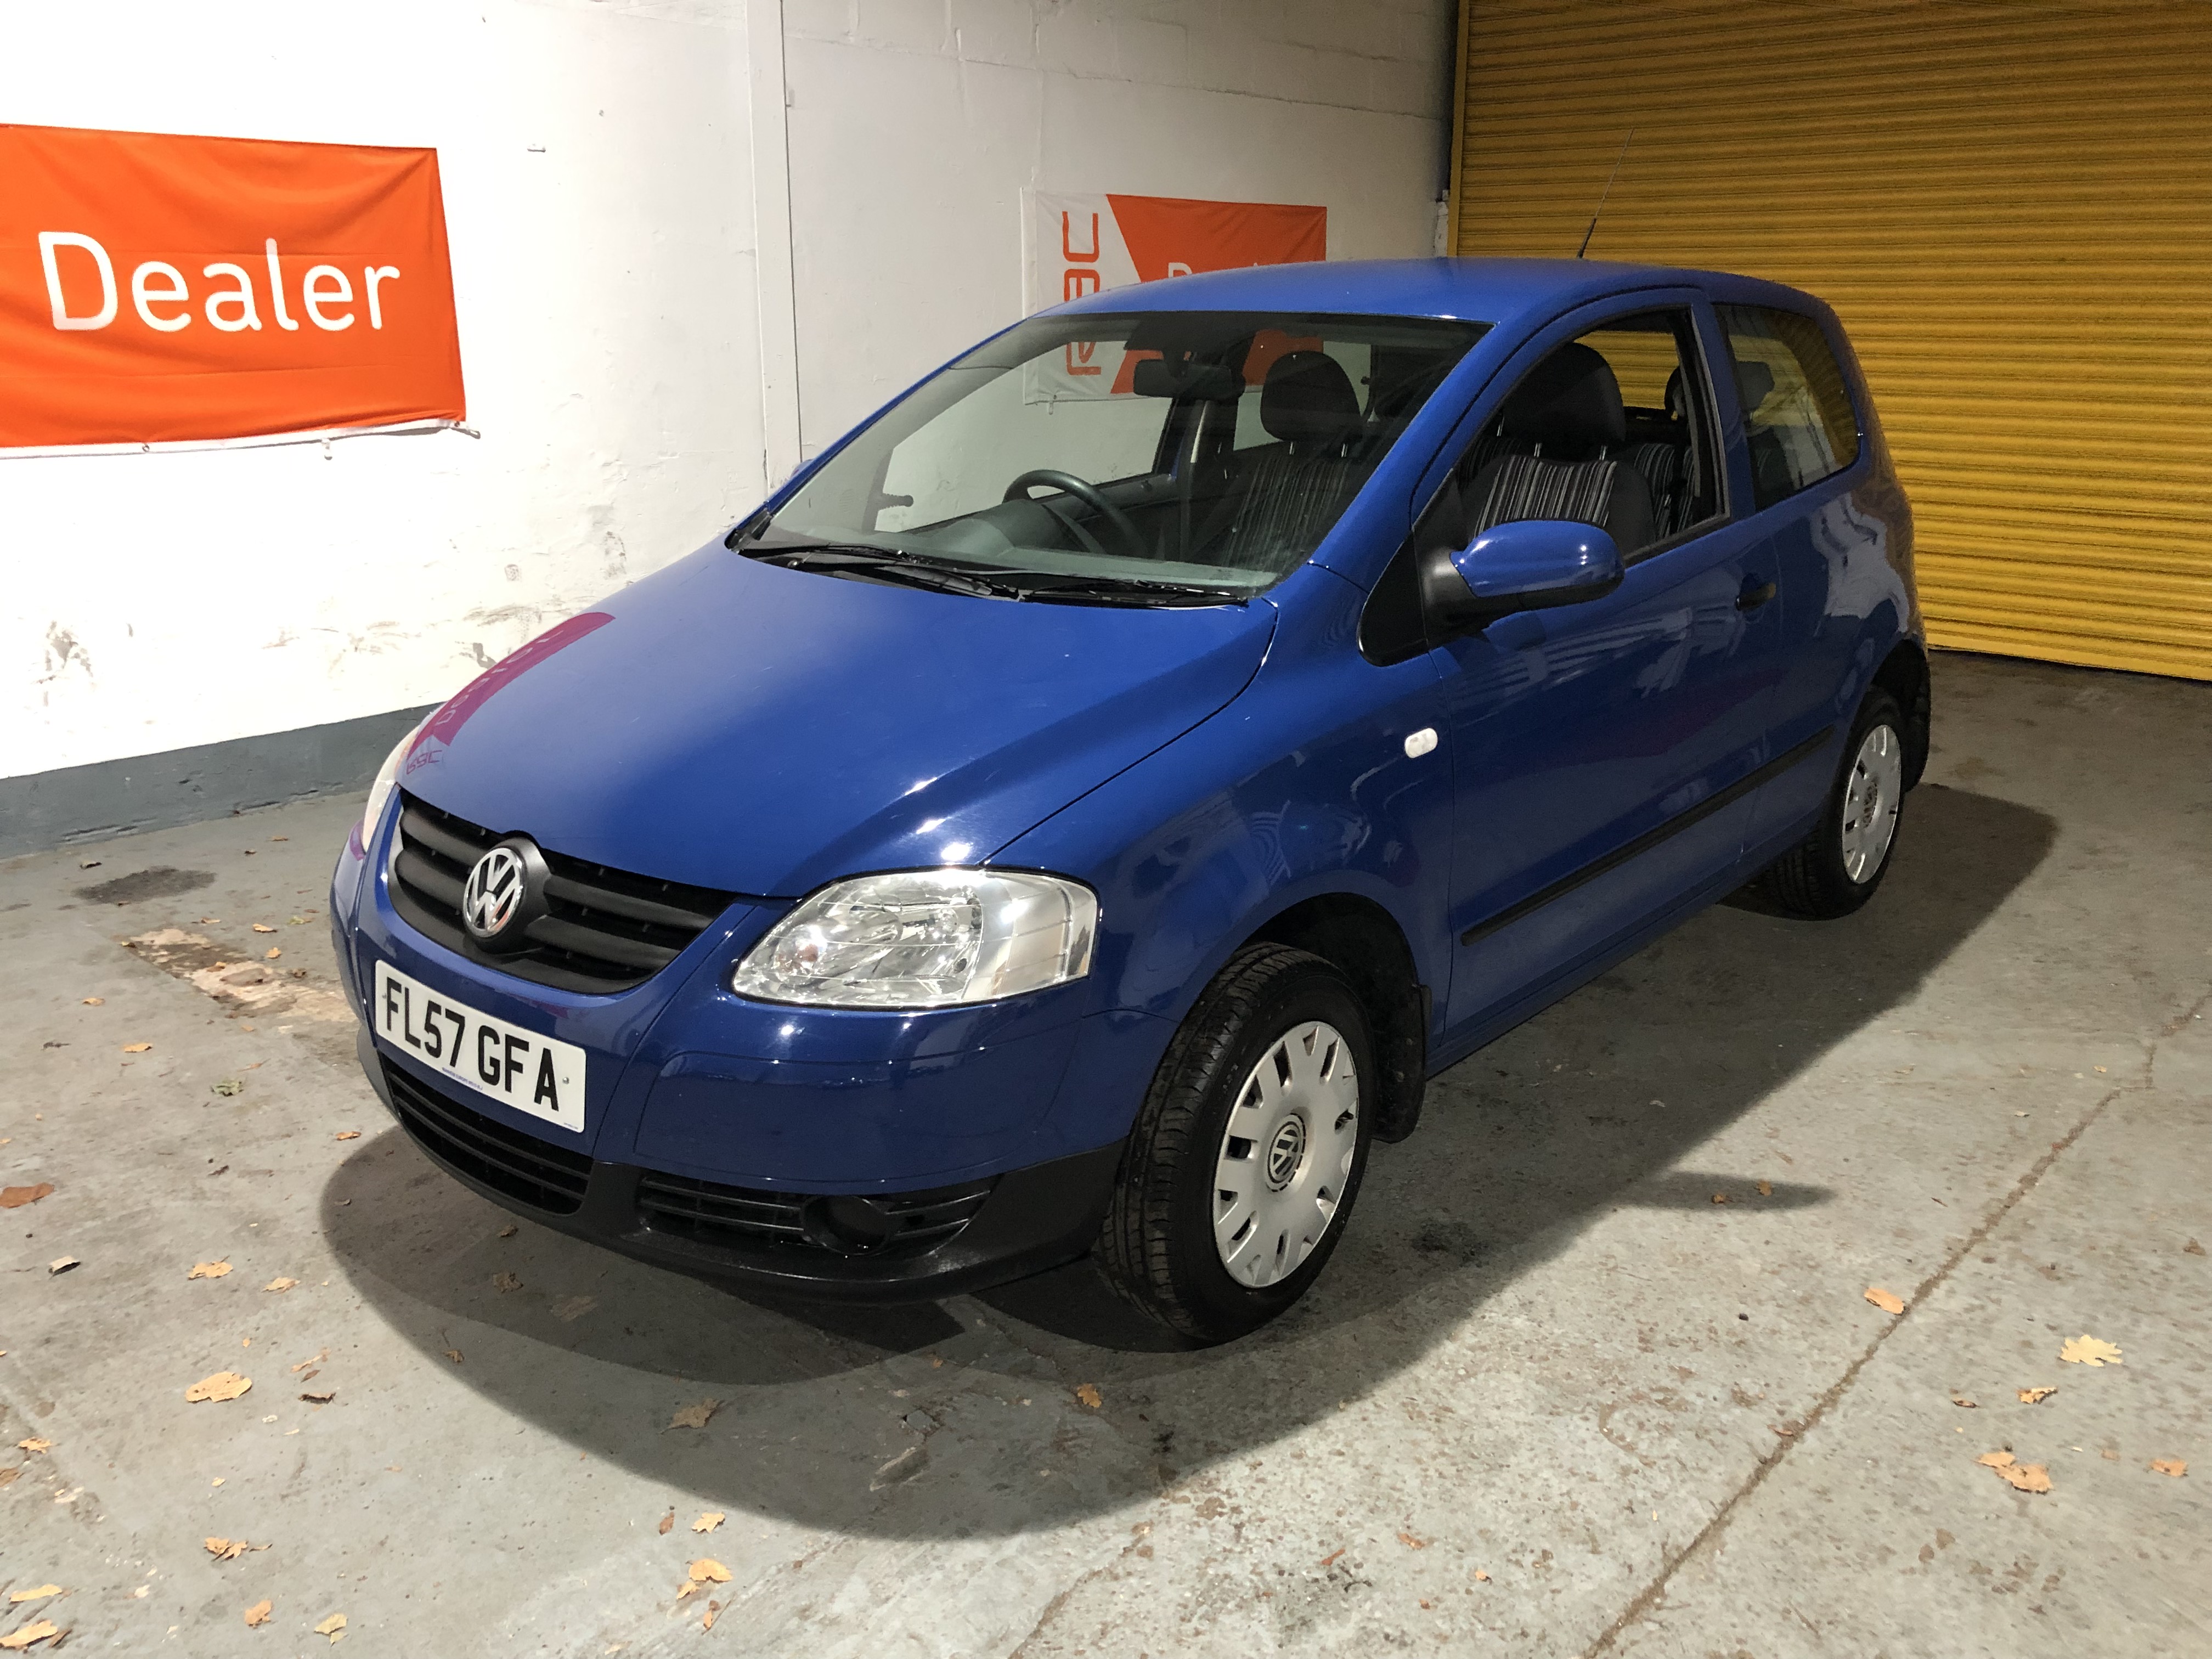 2007 VW Fox 1.2 Petrol - One Owner with full VW Service History